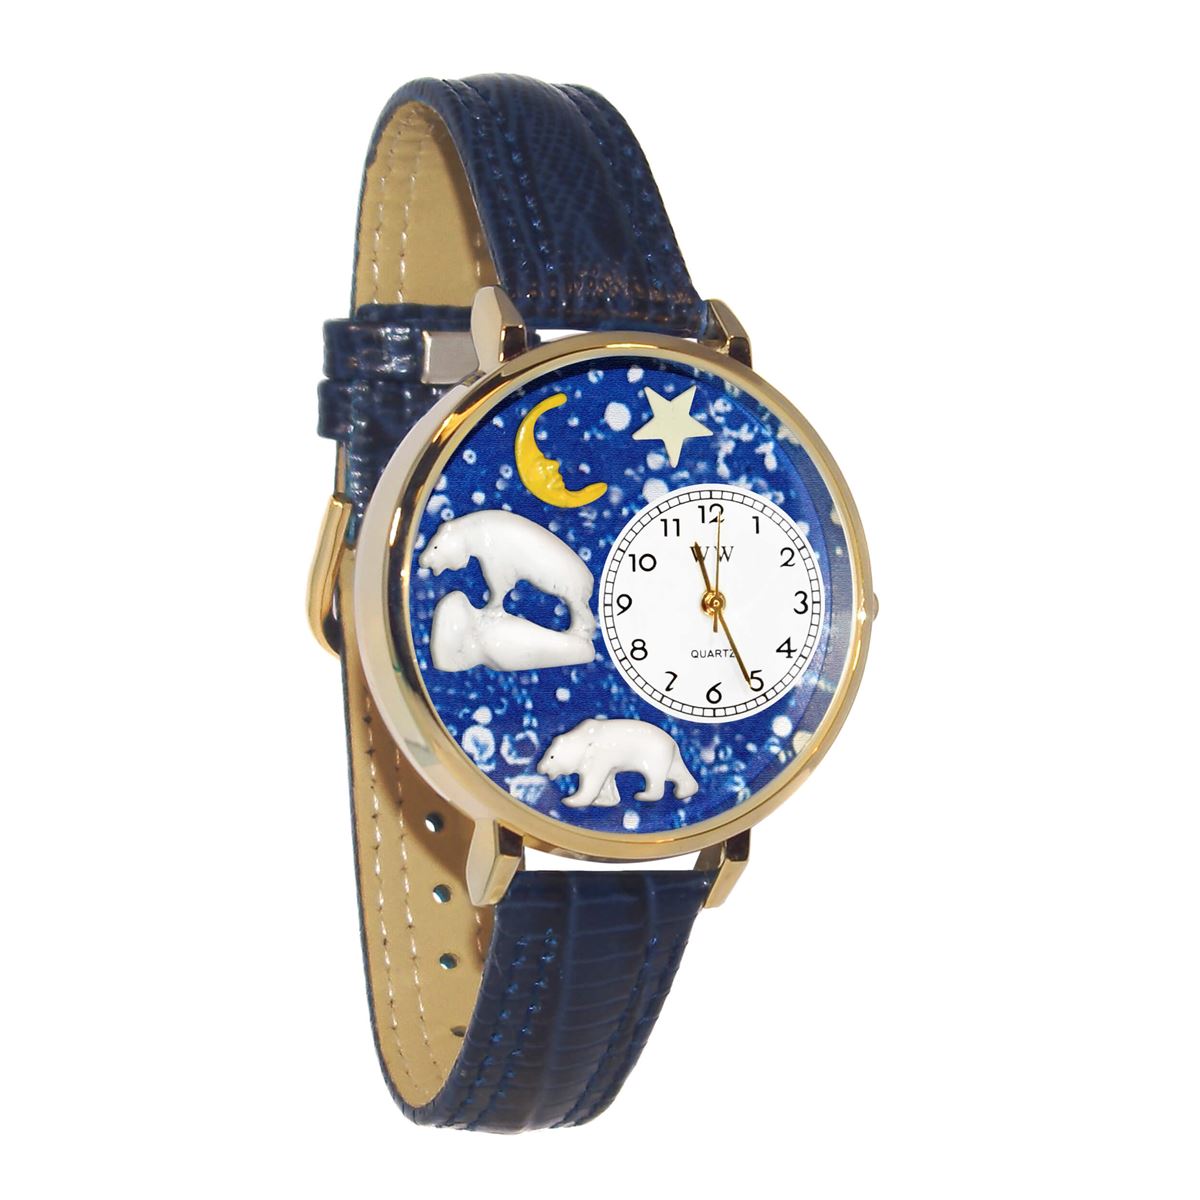 Whimsical Gifts | Polar Bear 3D Watch Large Style | Handmade in USA | Animal Lover | Zoo & Sealife | Novelty Unique Fun Miniatures Gift | Gold Finish Navy Blue Leather Watch Band